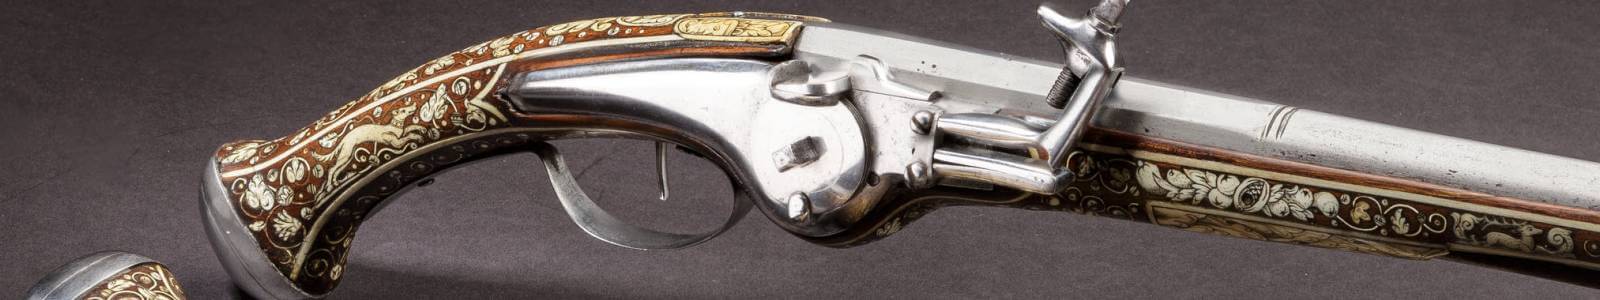 Presence auction - firearms from five centuries